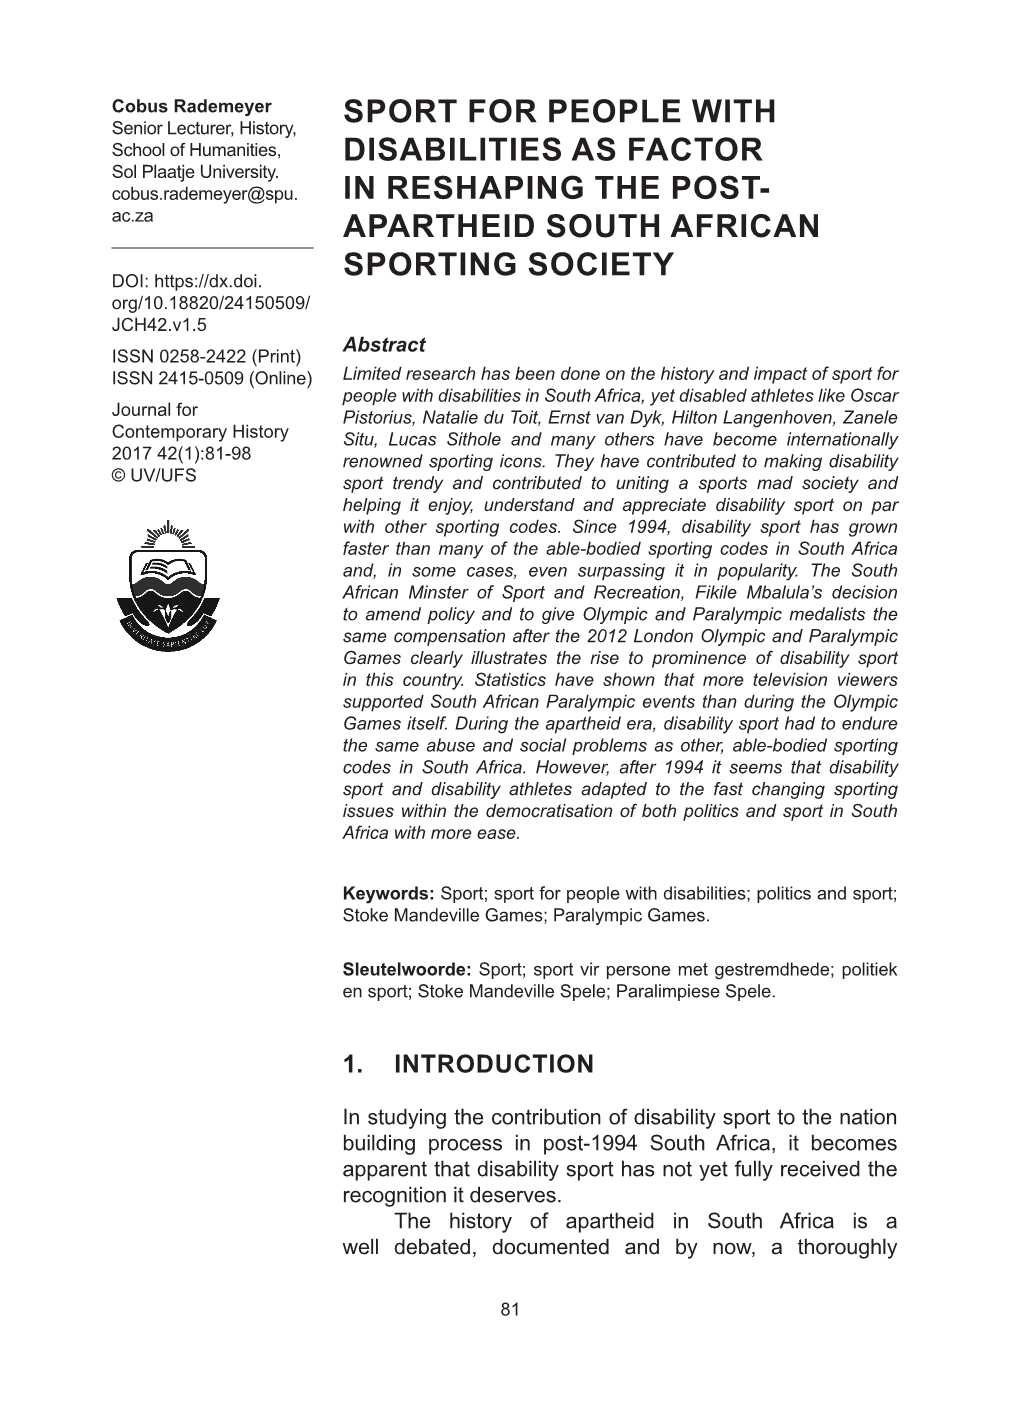 Apartheid South African Sporting Society